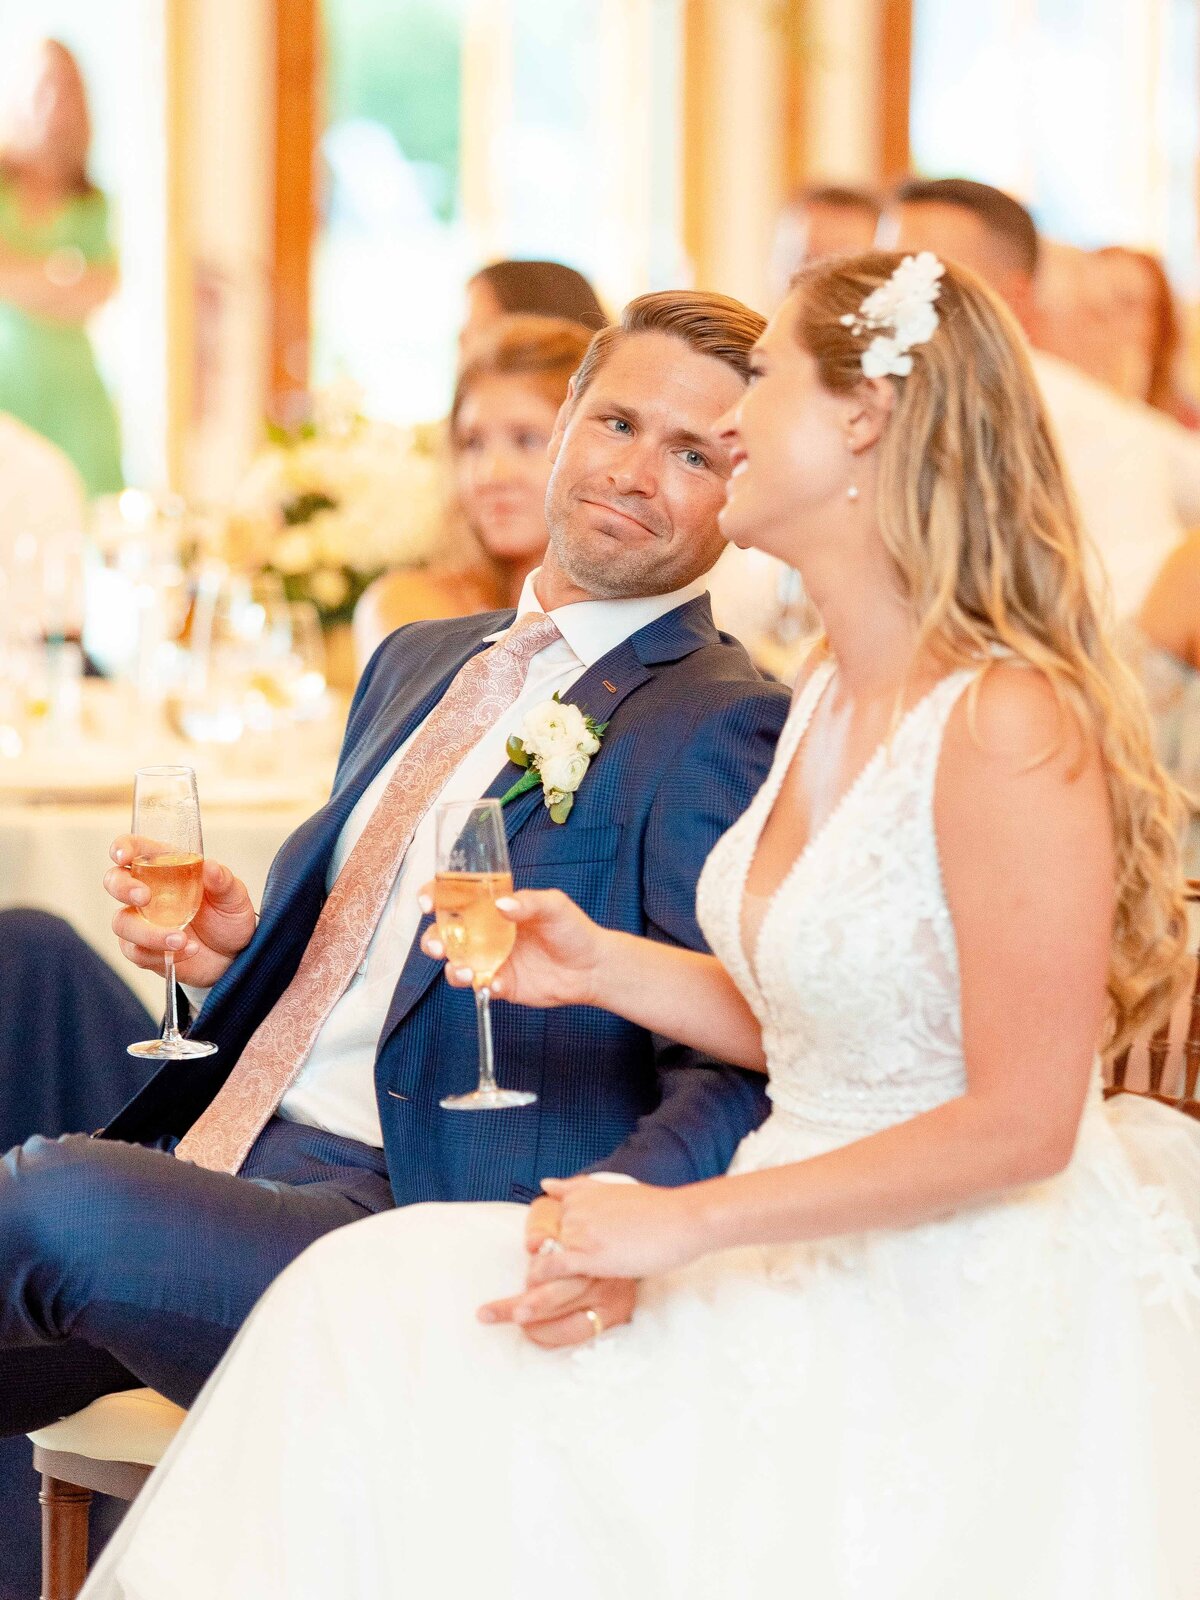 Groom looks at his wife during toasts at his wedding reception in Newport, RI.